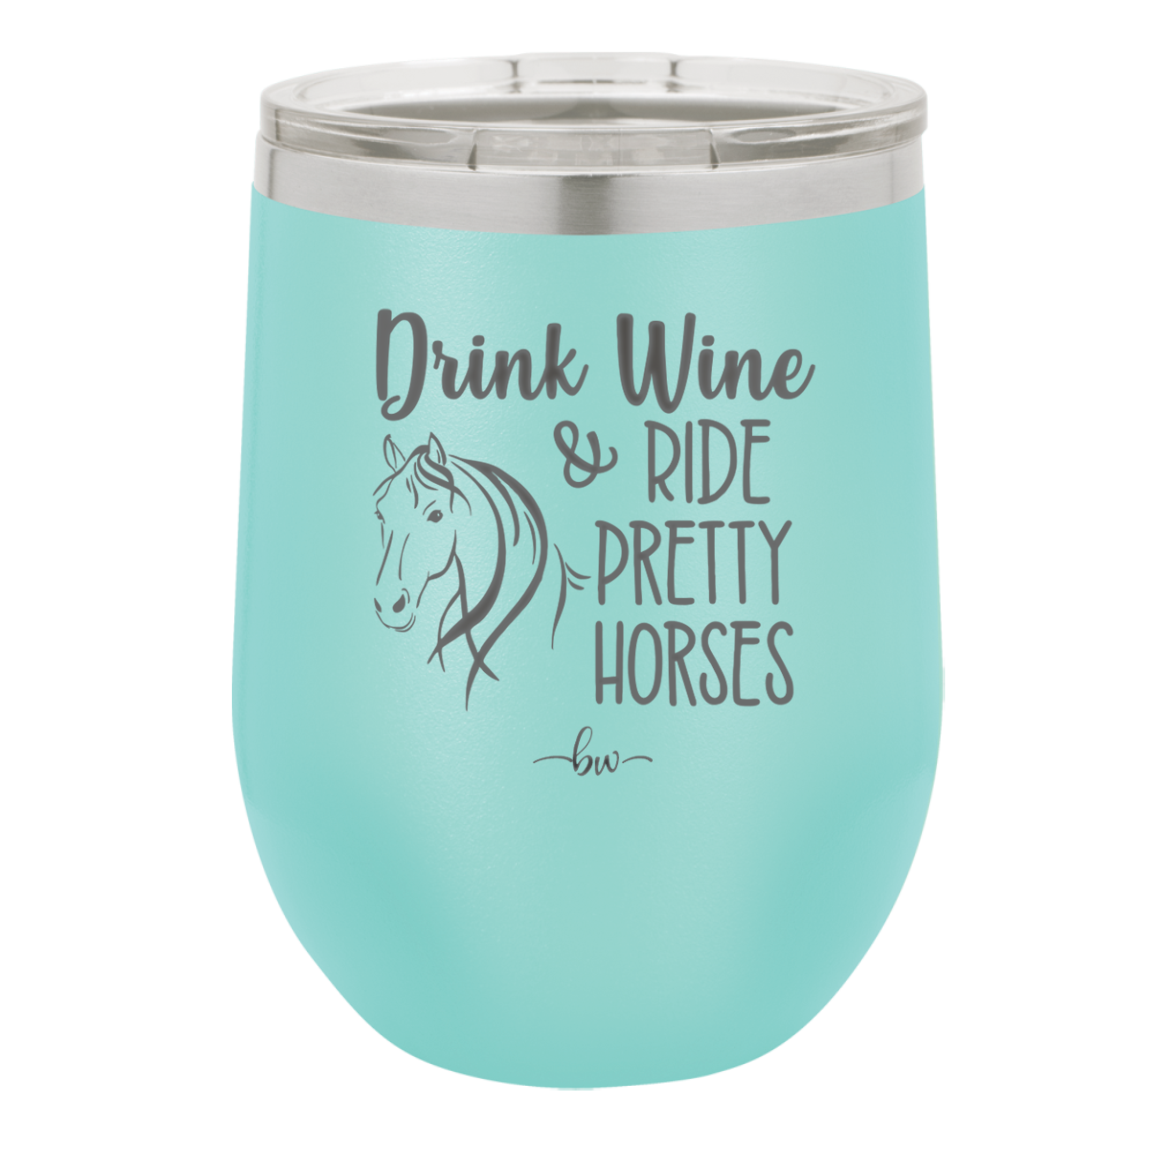 Drink Wine and Ride Pretty Horses - Laser Engraved Stainless Steel Drinkware - 1039 -